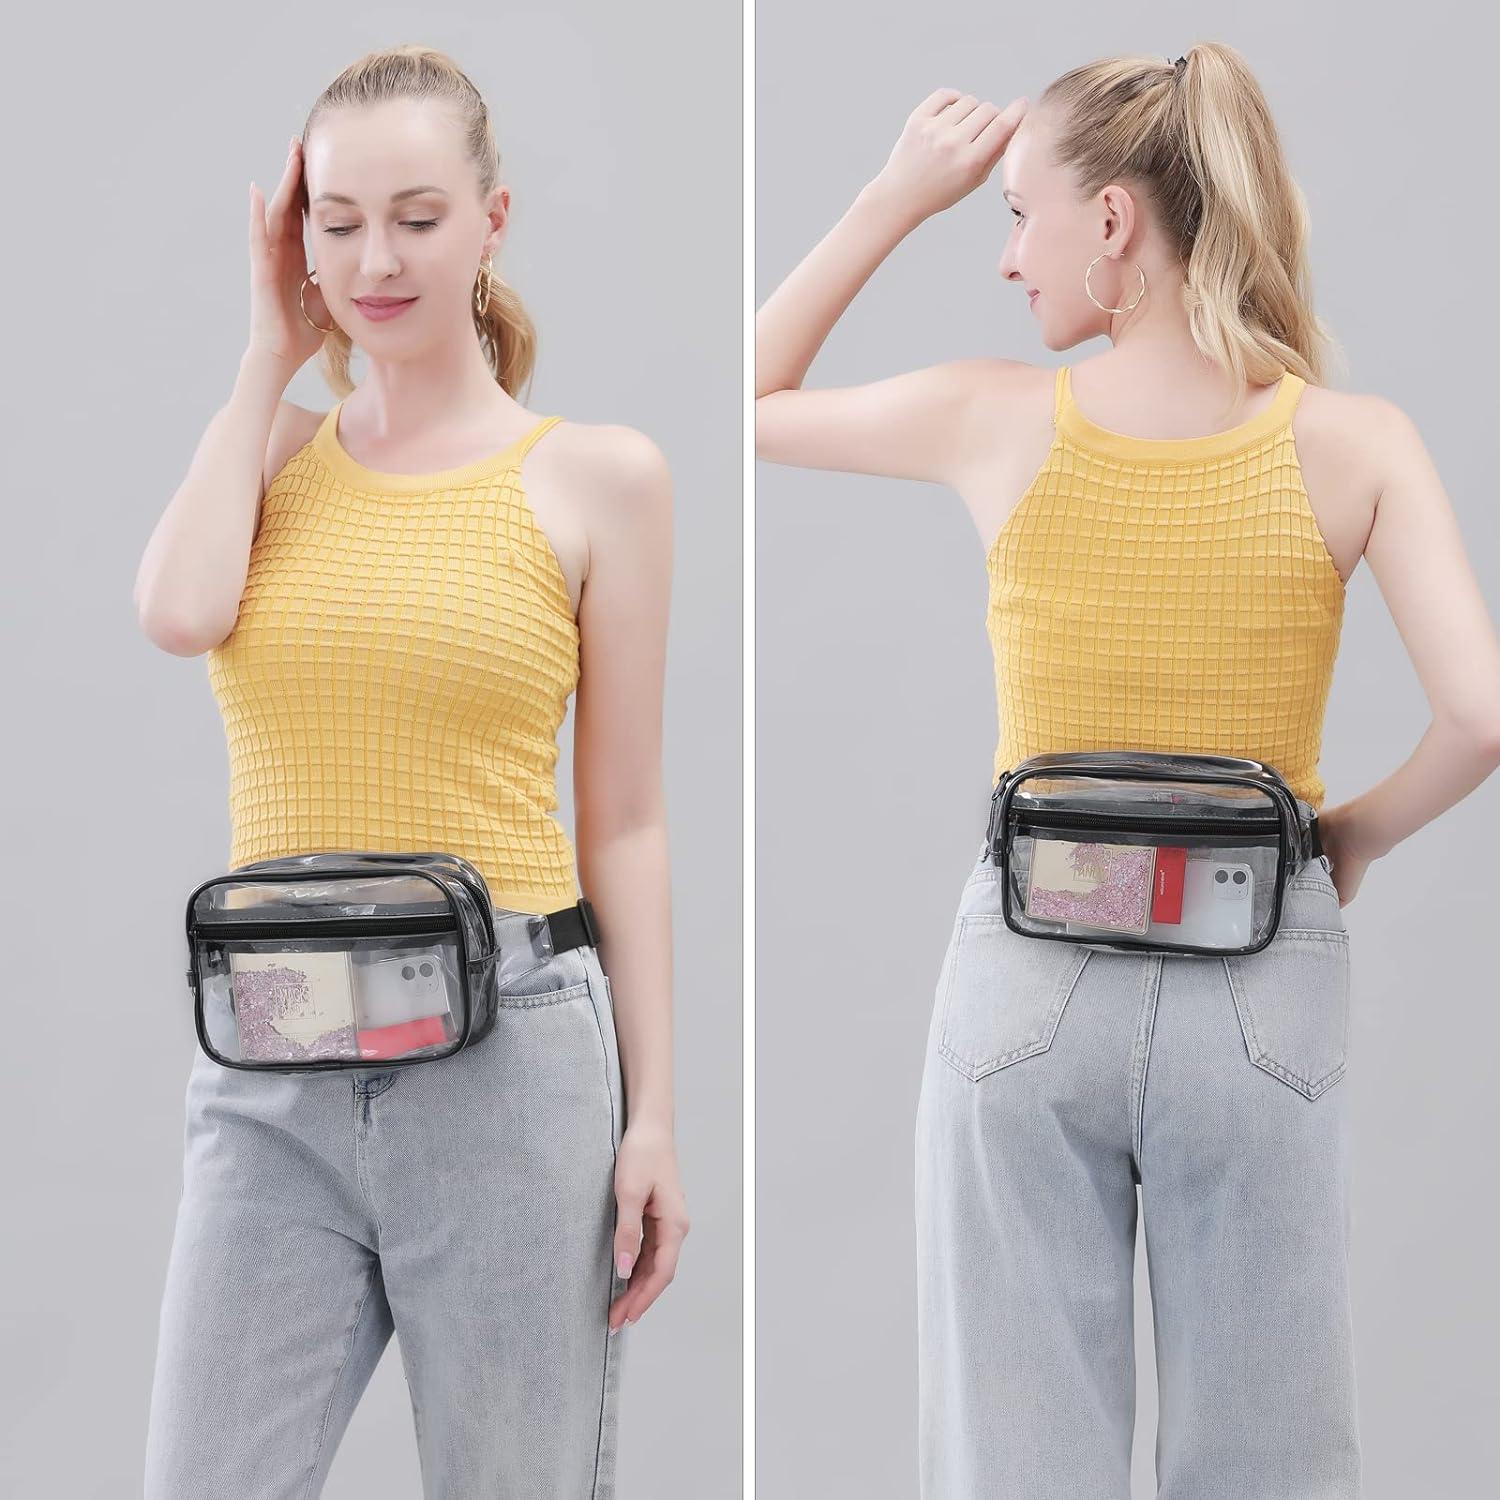 Clear Belt Bag Clear fanny pack stadium approved for Women Men with  Adjustable Strap Clear Crossbody Bag Waist Bag for Concerts Sports  Travelling